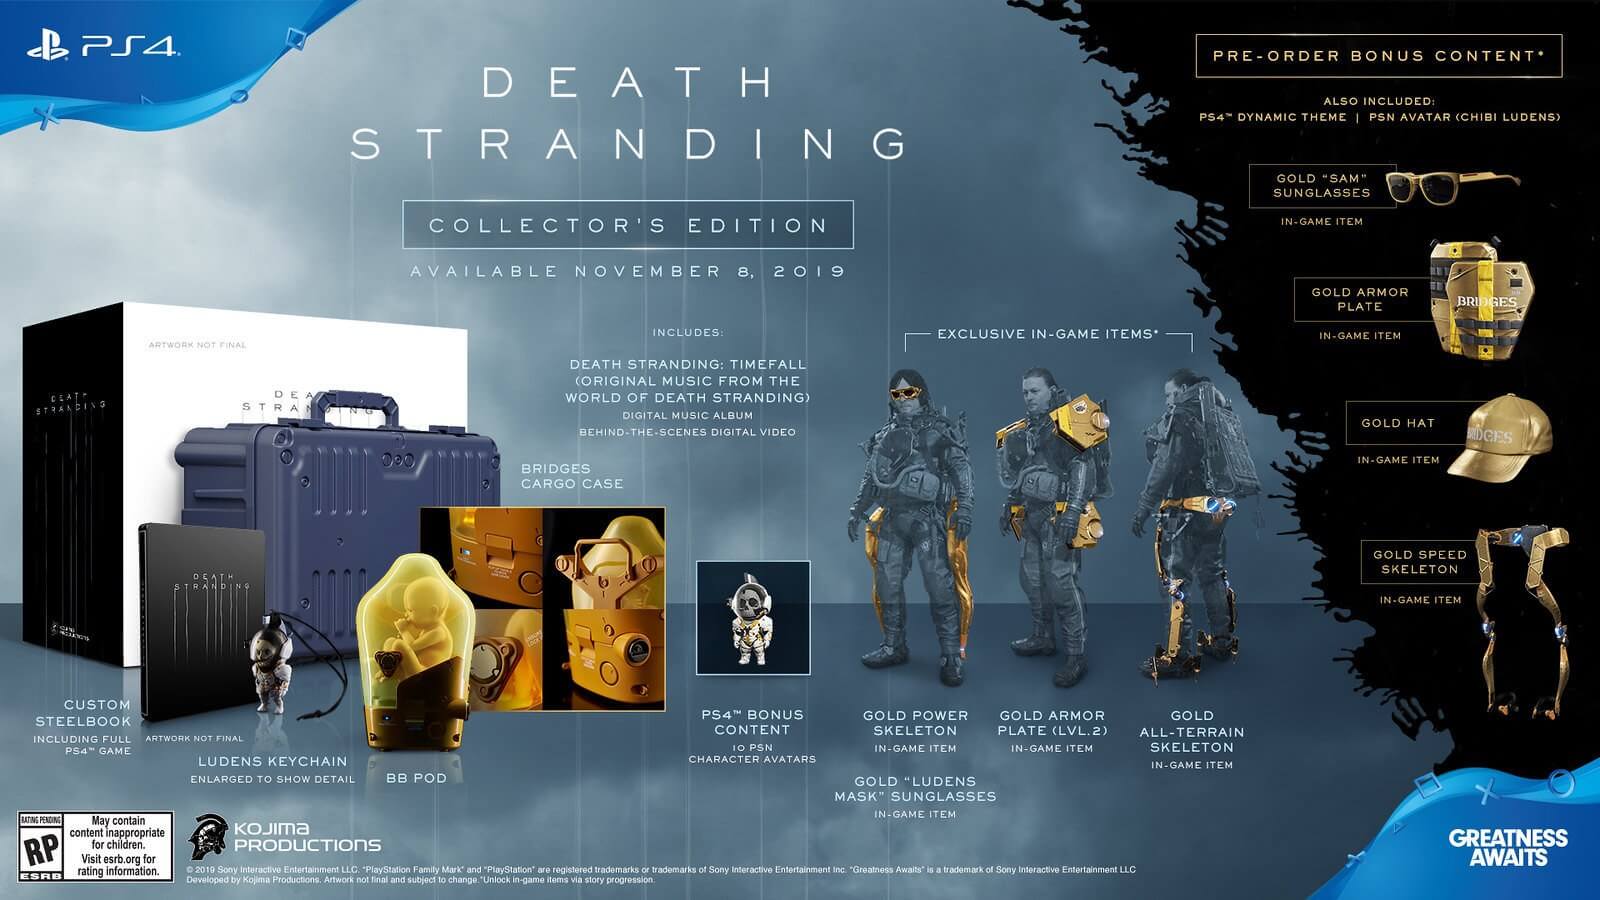 Death Stranding's Collector's Edition has been revealed, and it includes a pod with a baby inside